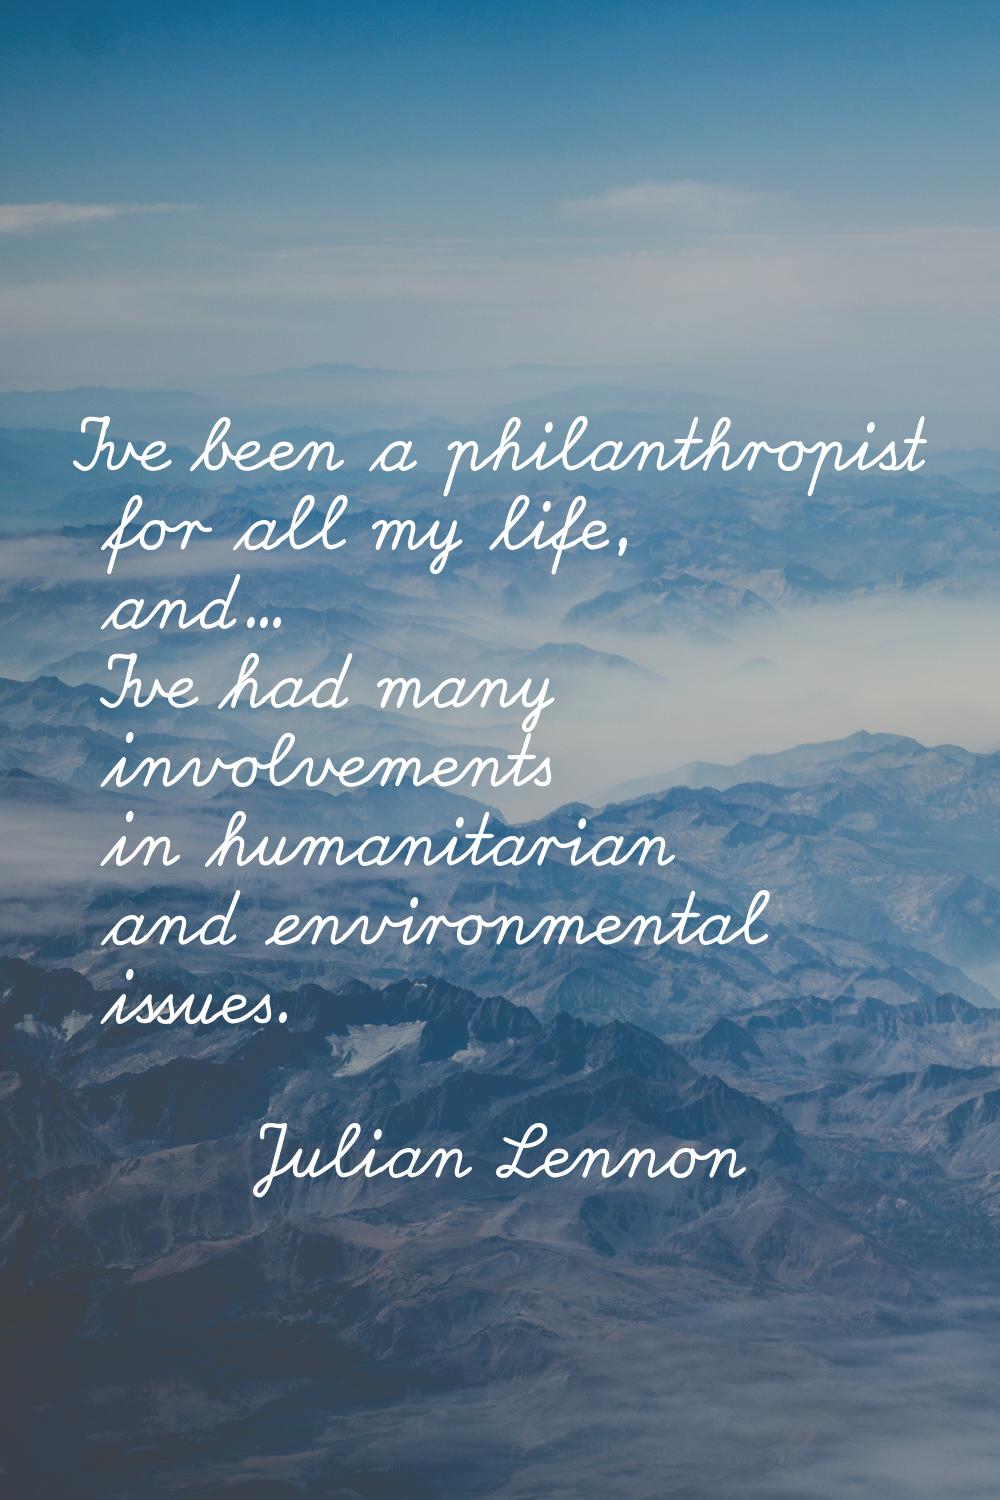 I've been a philanthropist for all my life, and... I've had many involvements in humanitarian and e